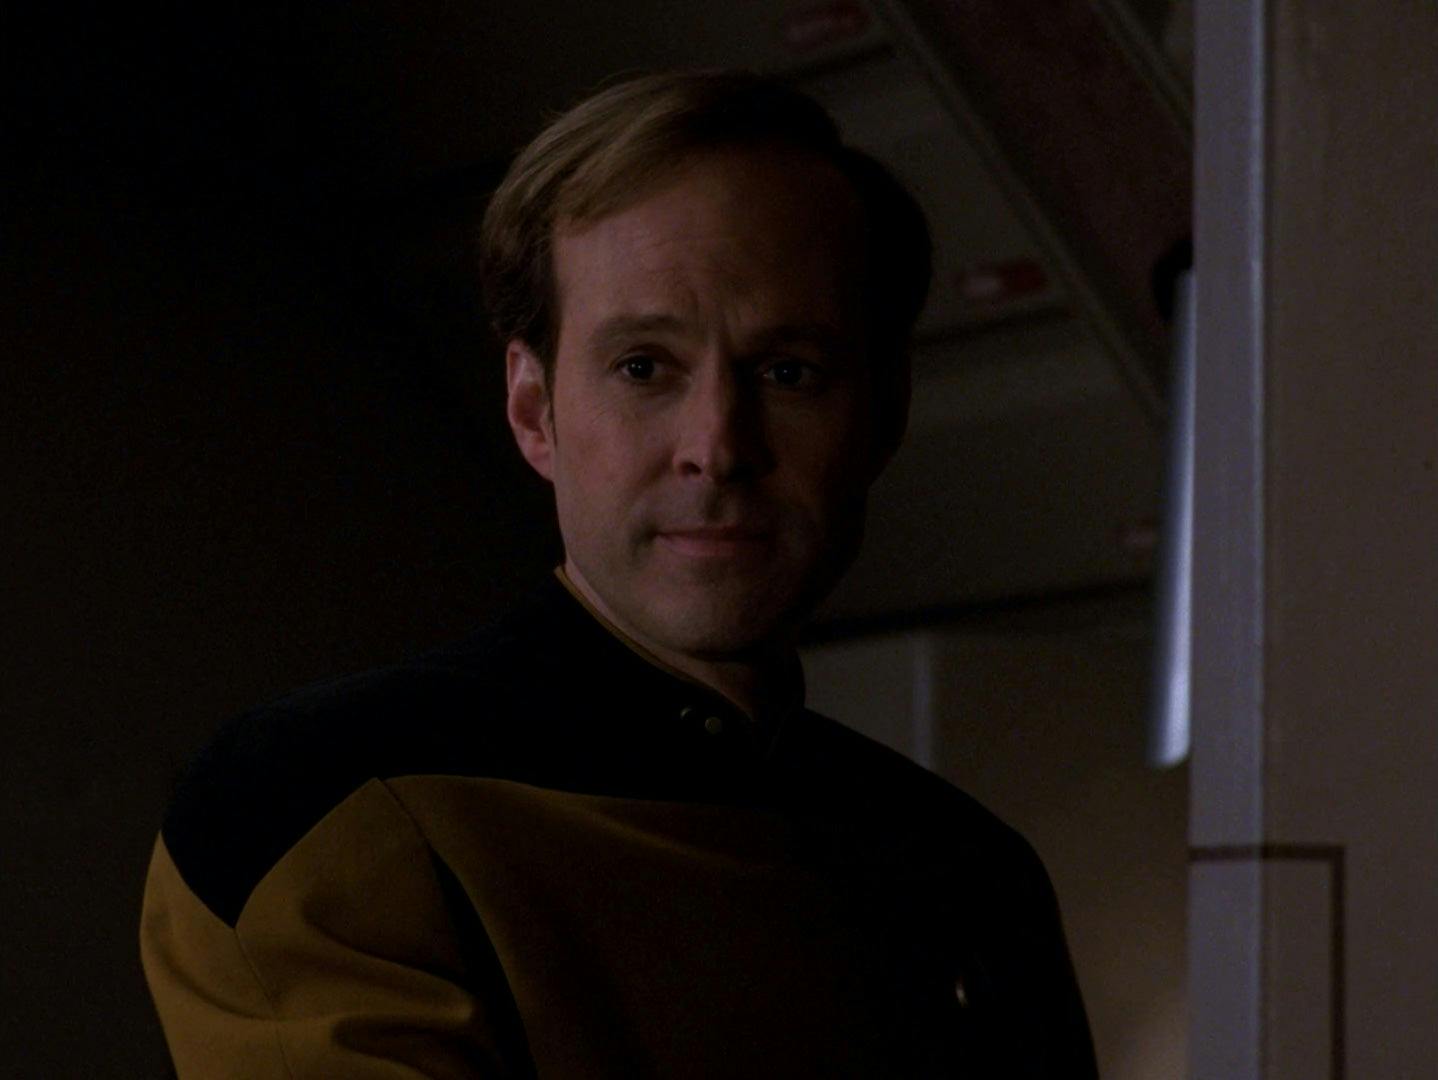 Close-up of Reginald Barclay in Star Trek: The Next Generation - 'The Nth' Degree'